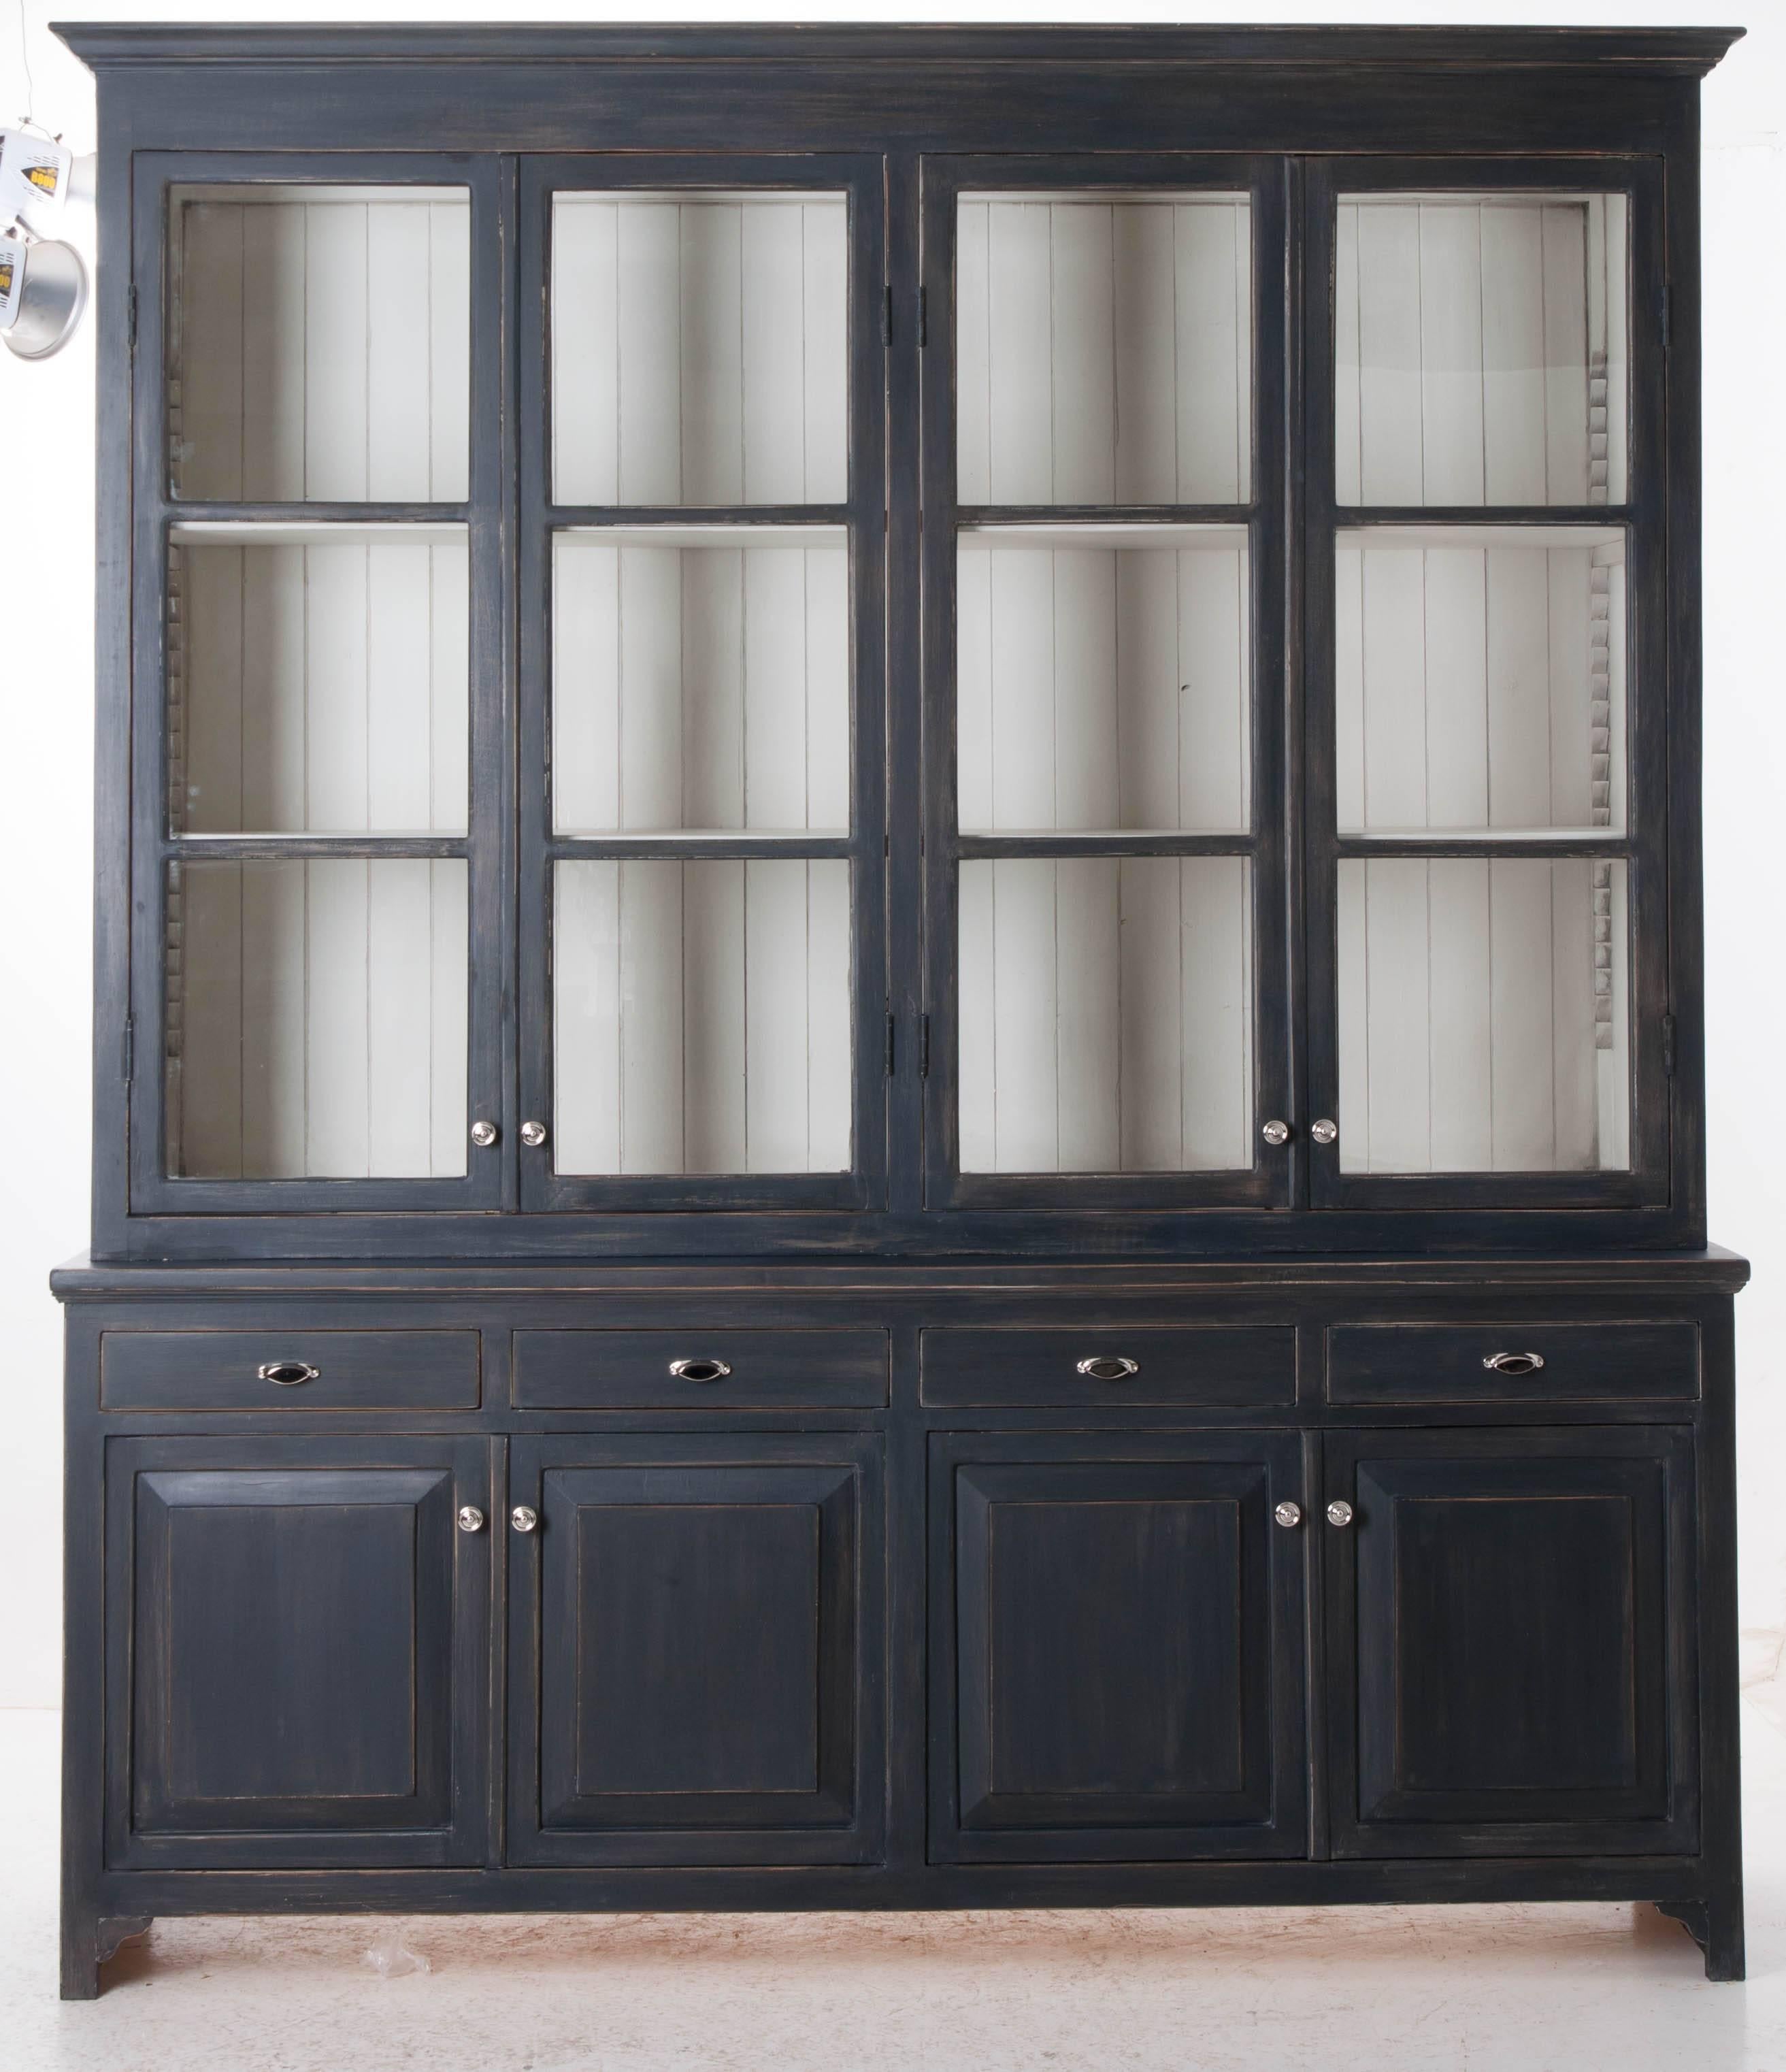 This custom eight door bibliotheque has four glass front upper doors that close before two adjustable shelves. The base has four drawers set above four doors that conceal one adjustable shelf. Bibliotheques are great for both displaying your